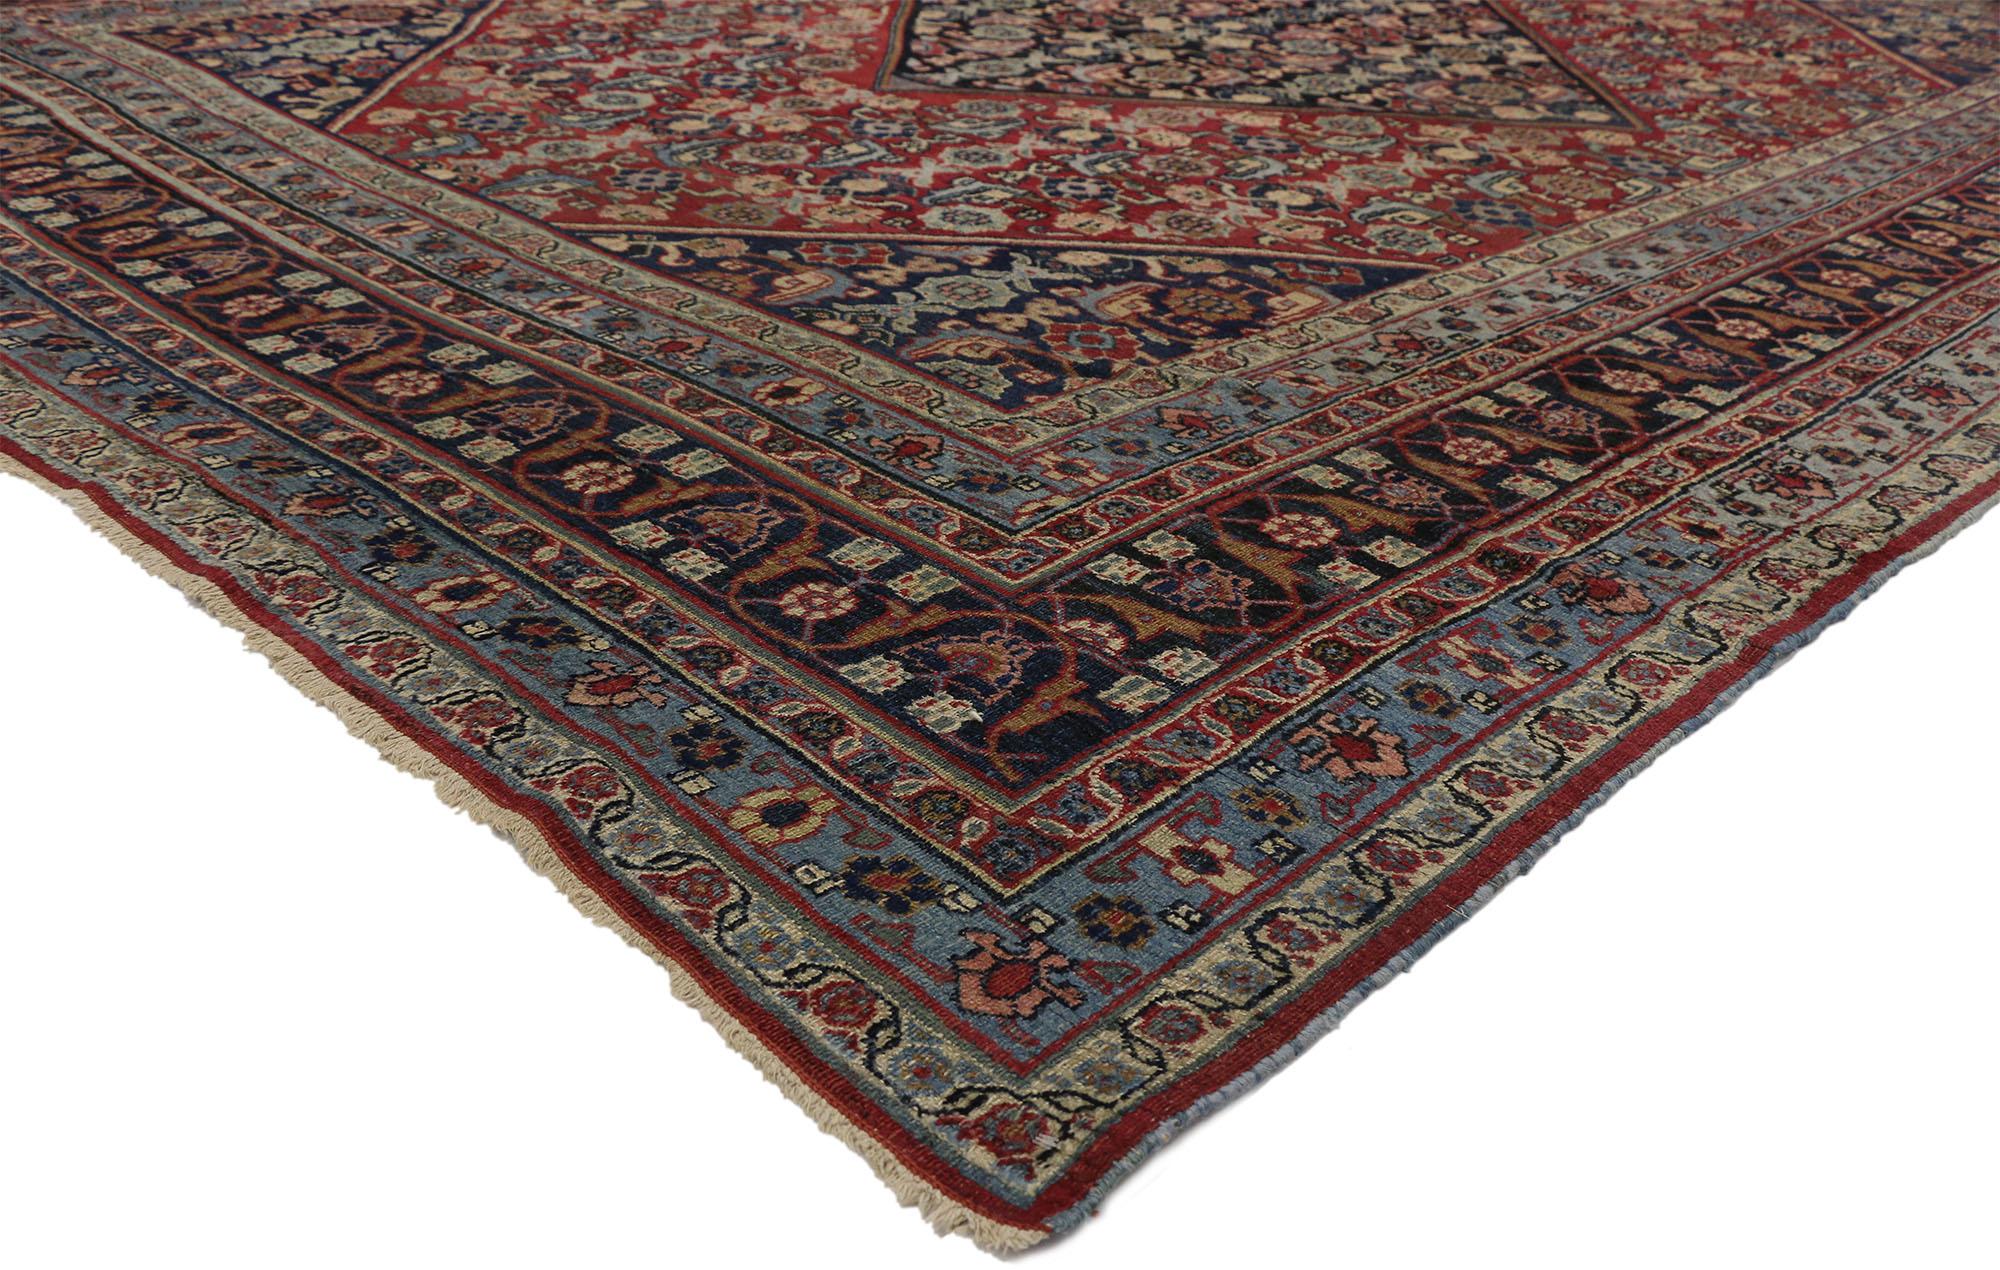 71963 Antique Persian Mashhad Rug, 09'05 X 12'04. Originating from the northeastern city of Mashhad in Iran, Mashhad rugs epitomize the pinnacle of artistry and craftsmanship. These revered masterpieces are renowned for their meticulous designs and